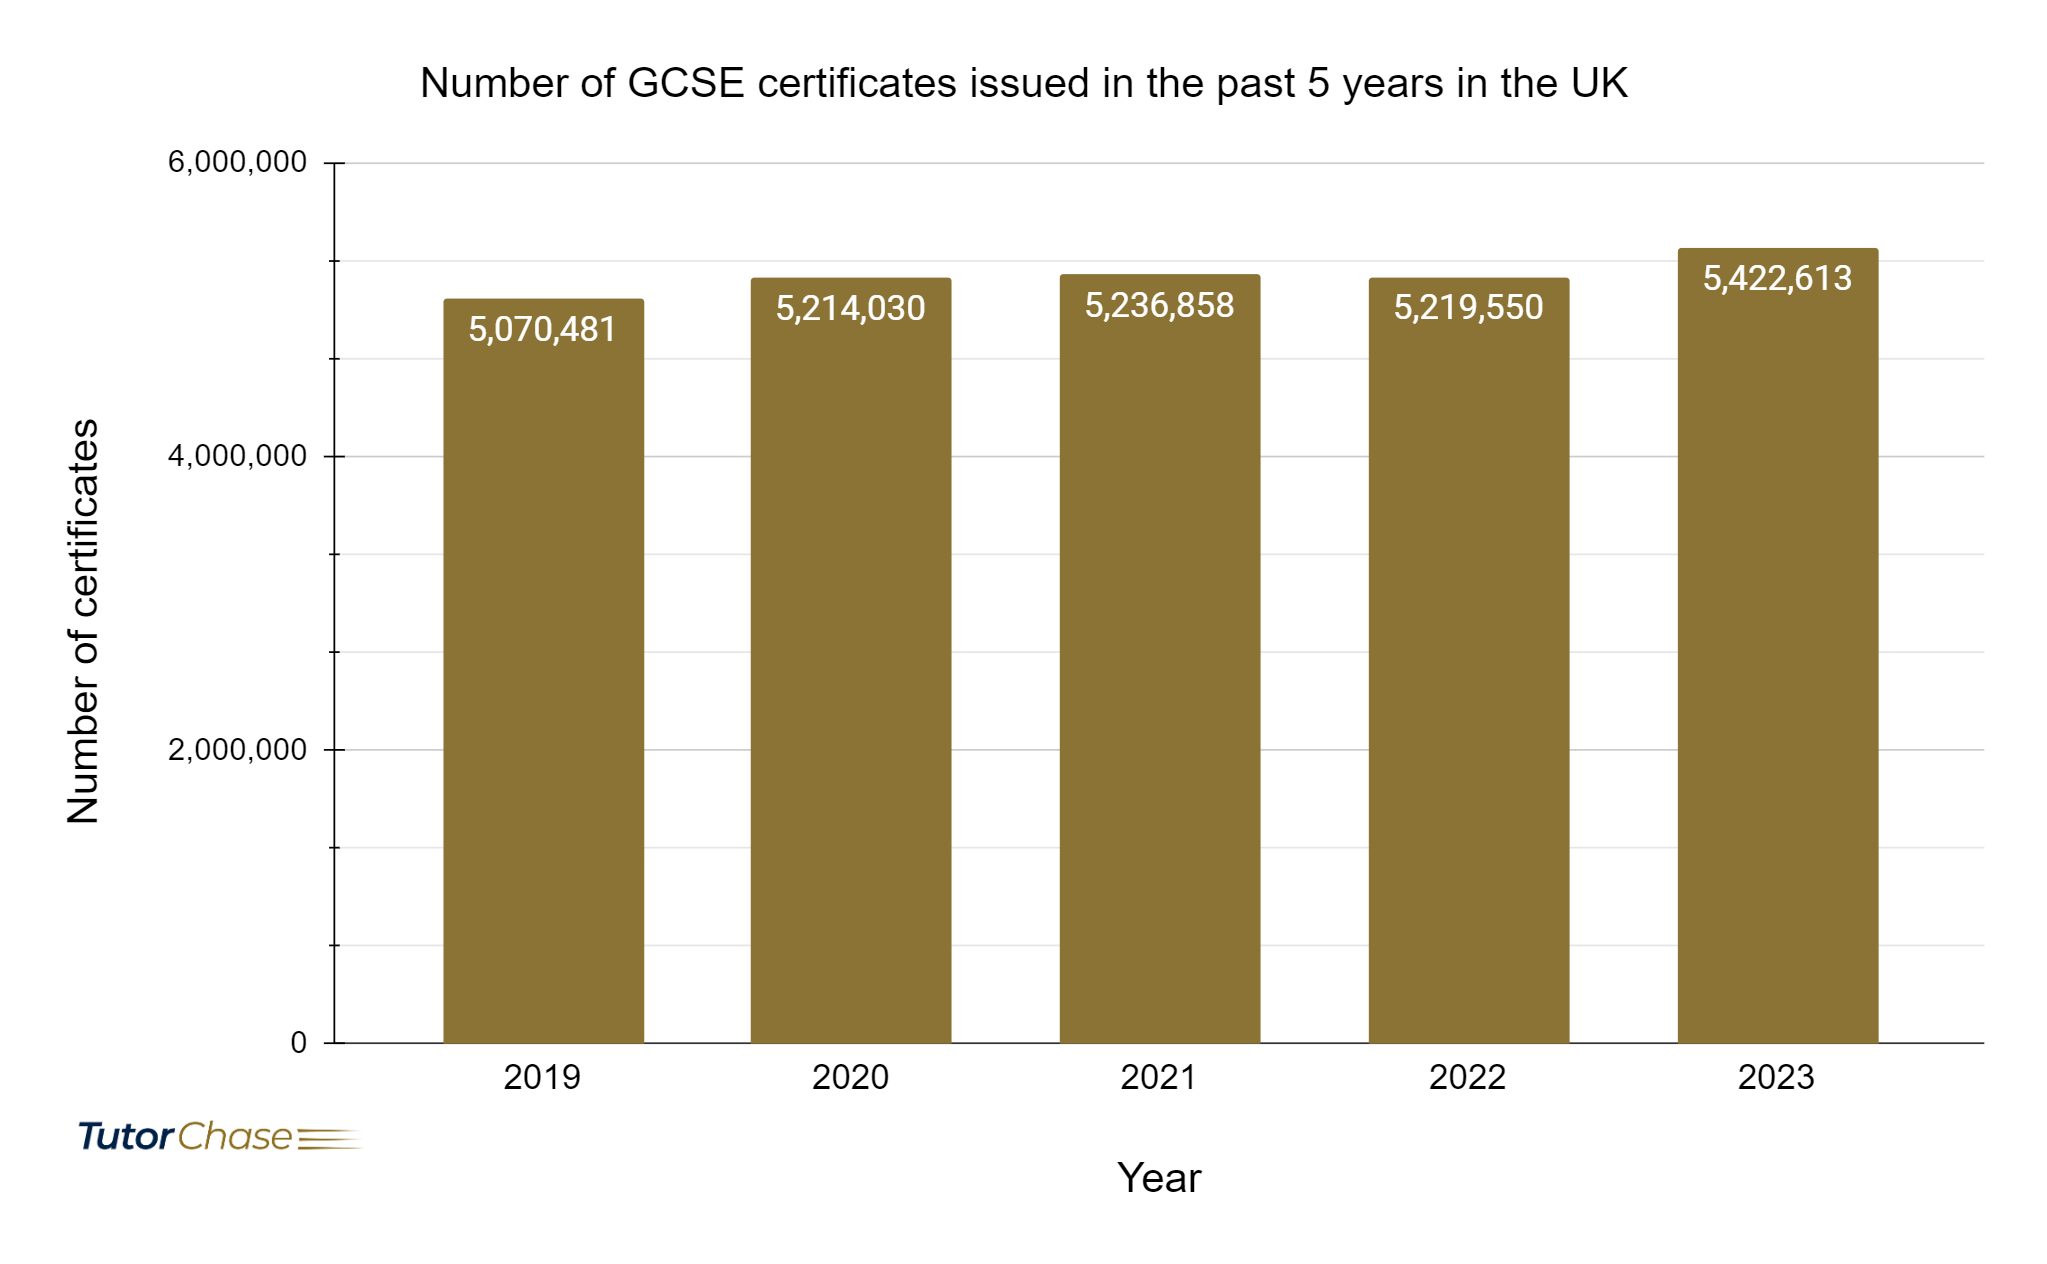 Number of GCSE certificates issued in the past 5 years in the UK